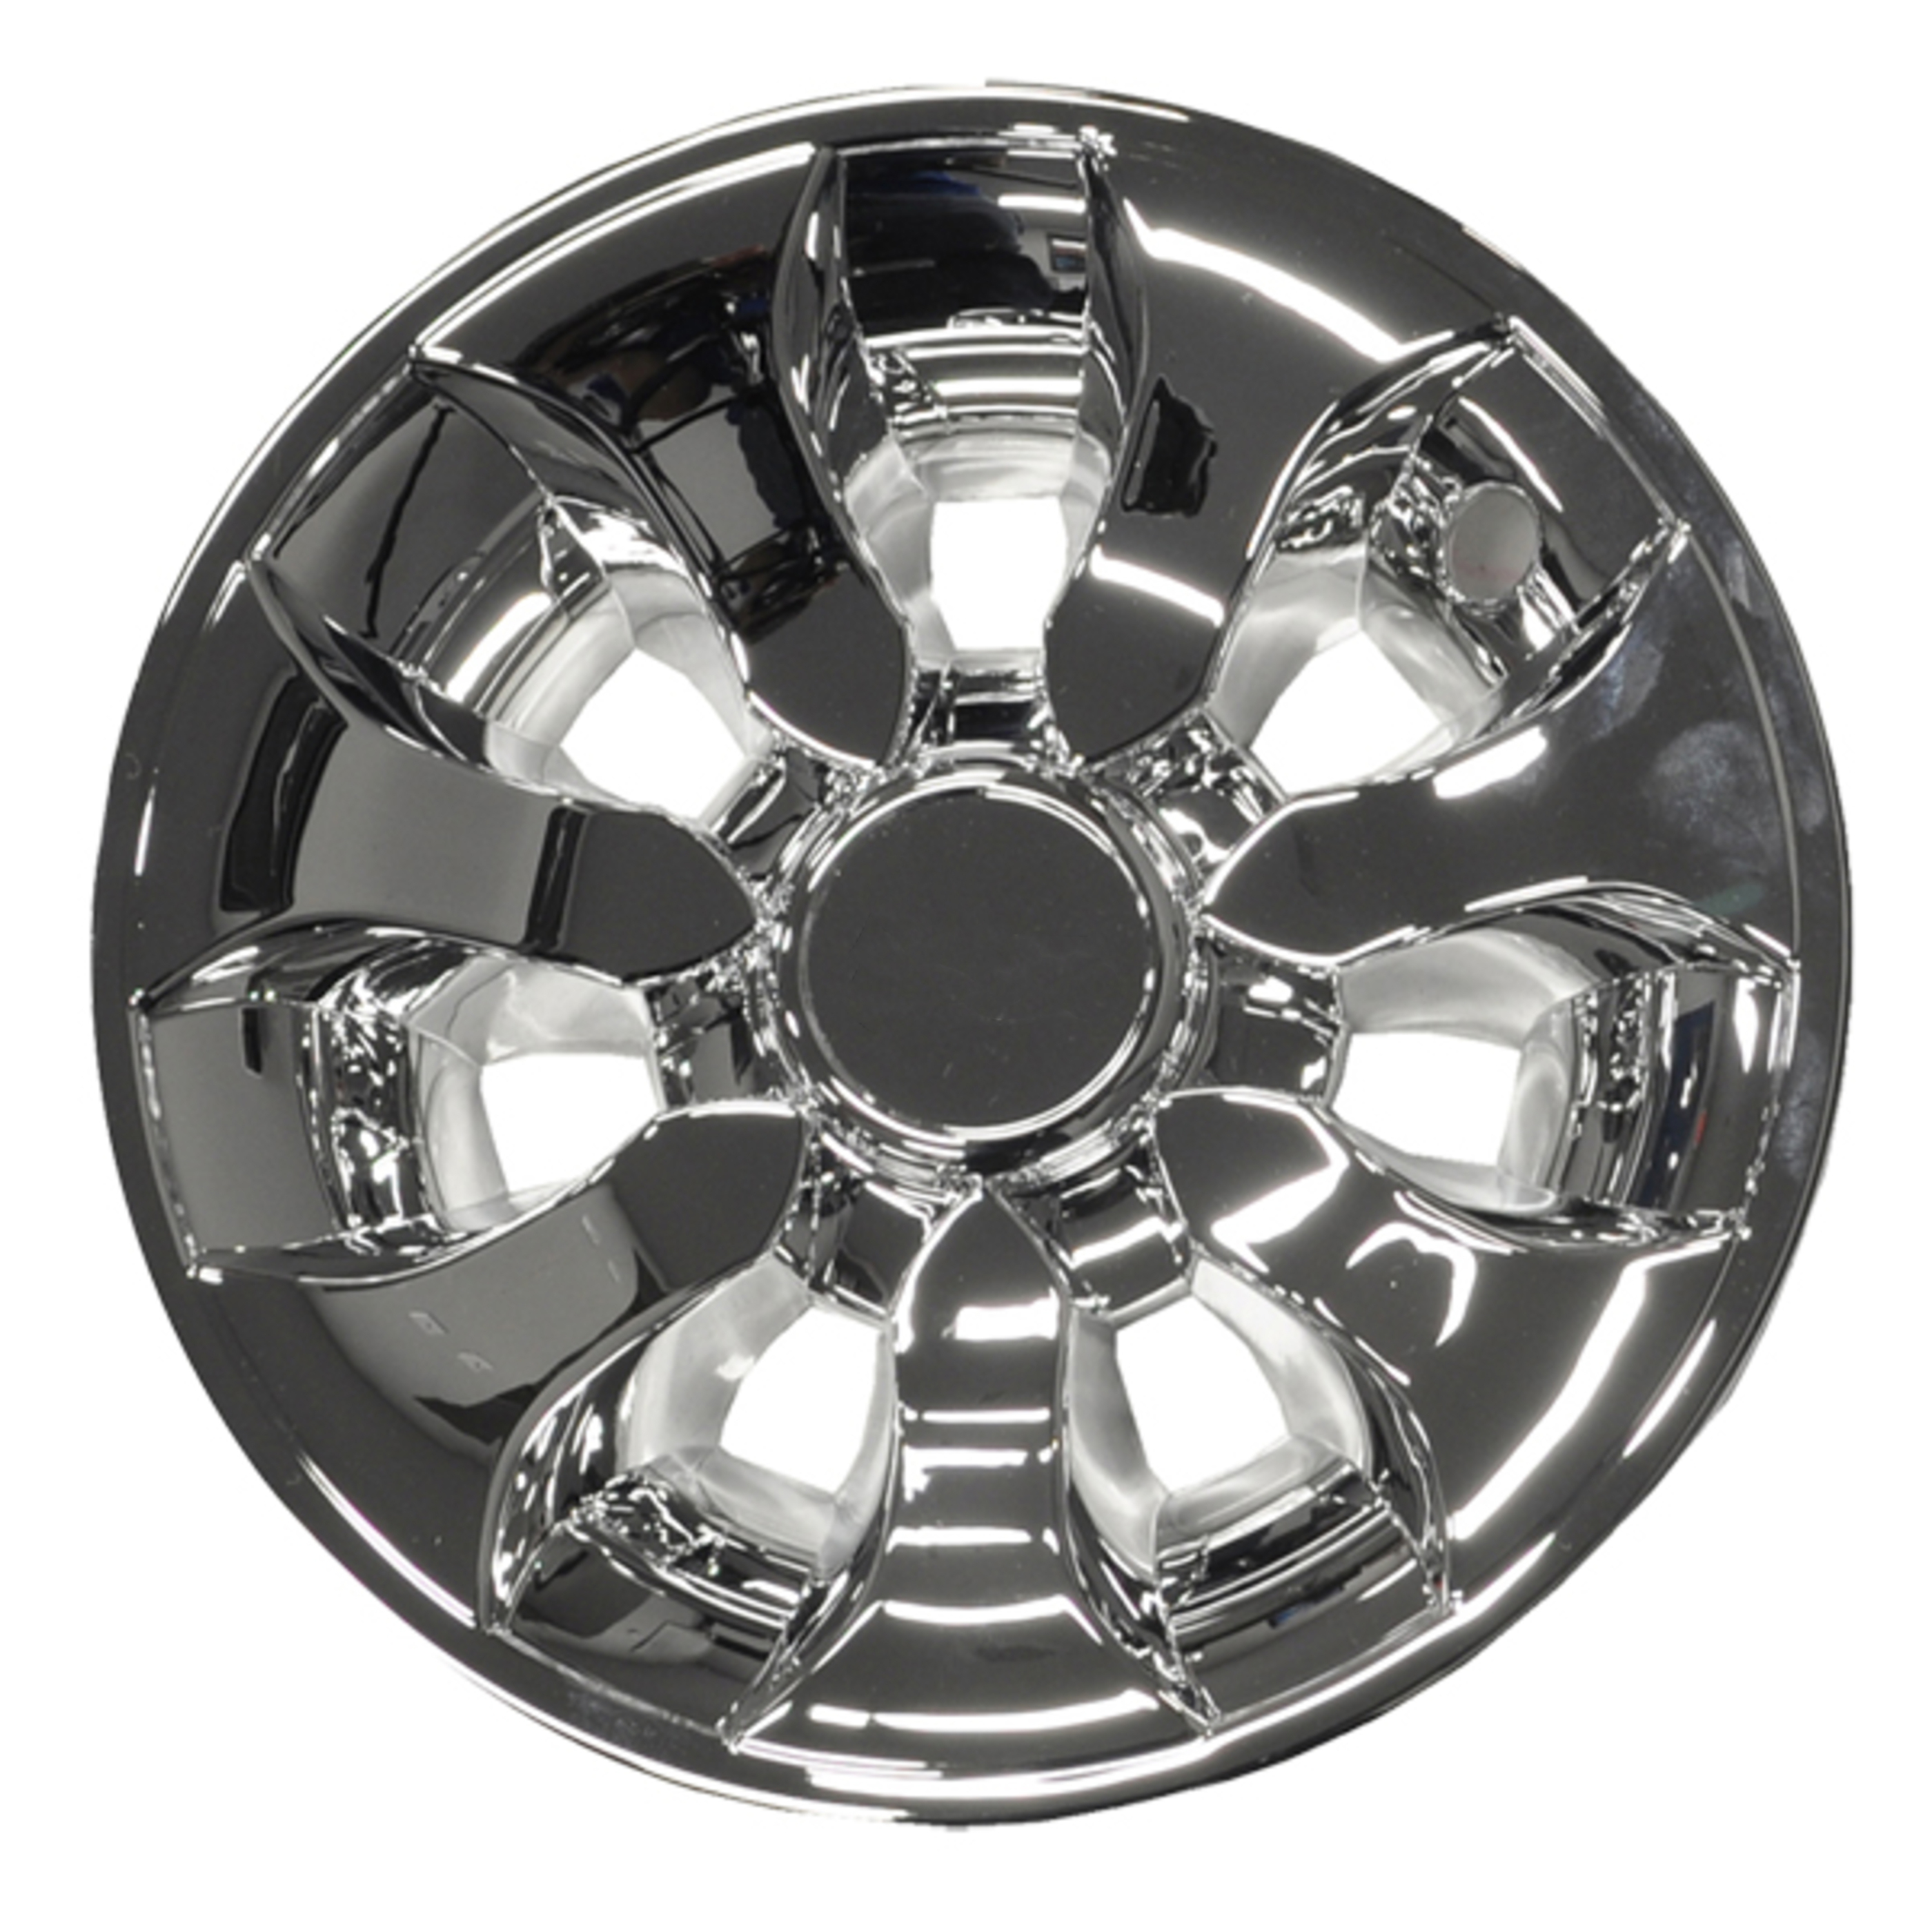 8” GTW® Drifter Chrome Wheel Cover (Universal Fit)